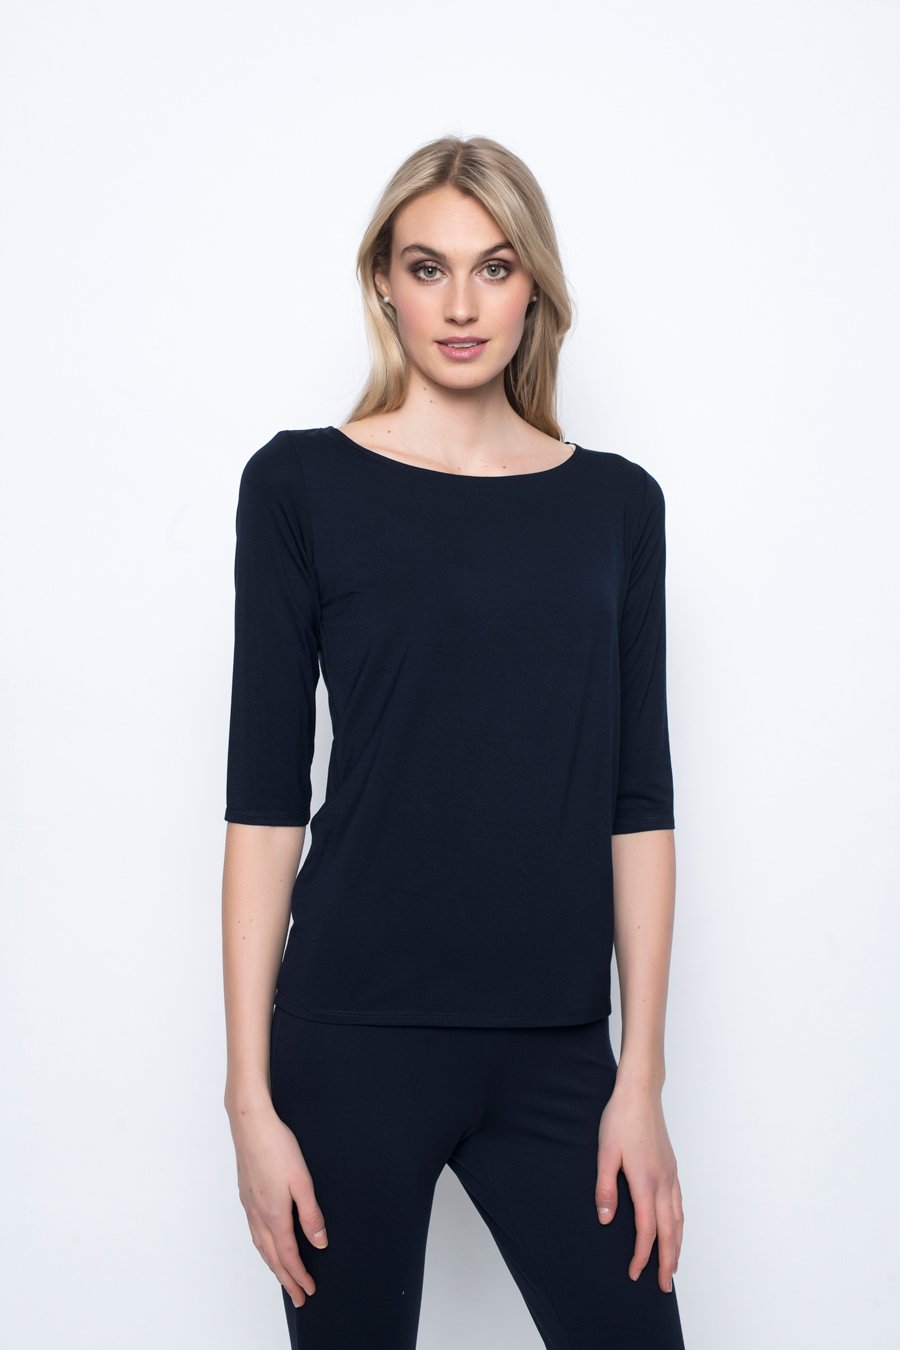 ¾ Sleeve Boat Neck Top